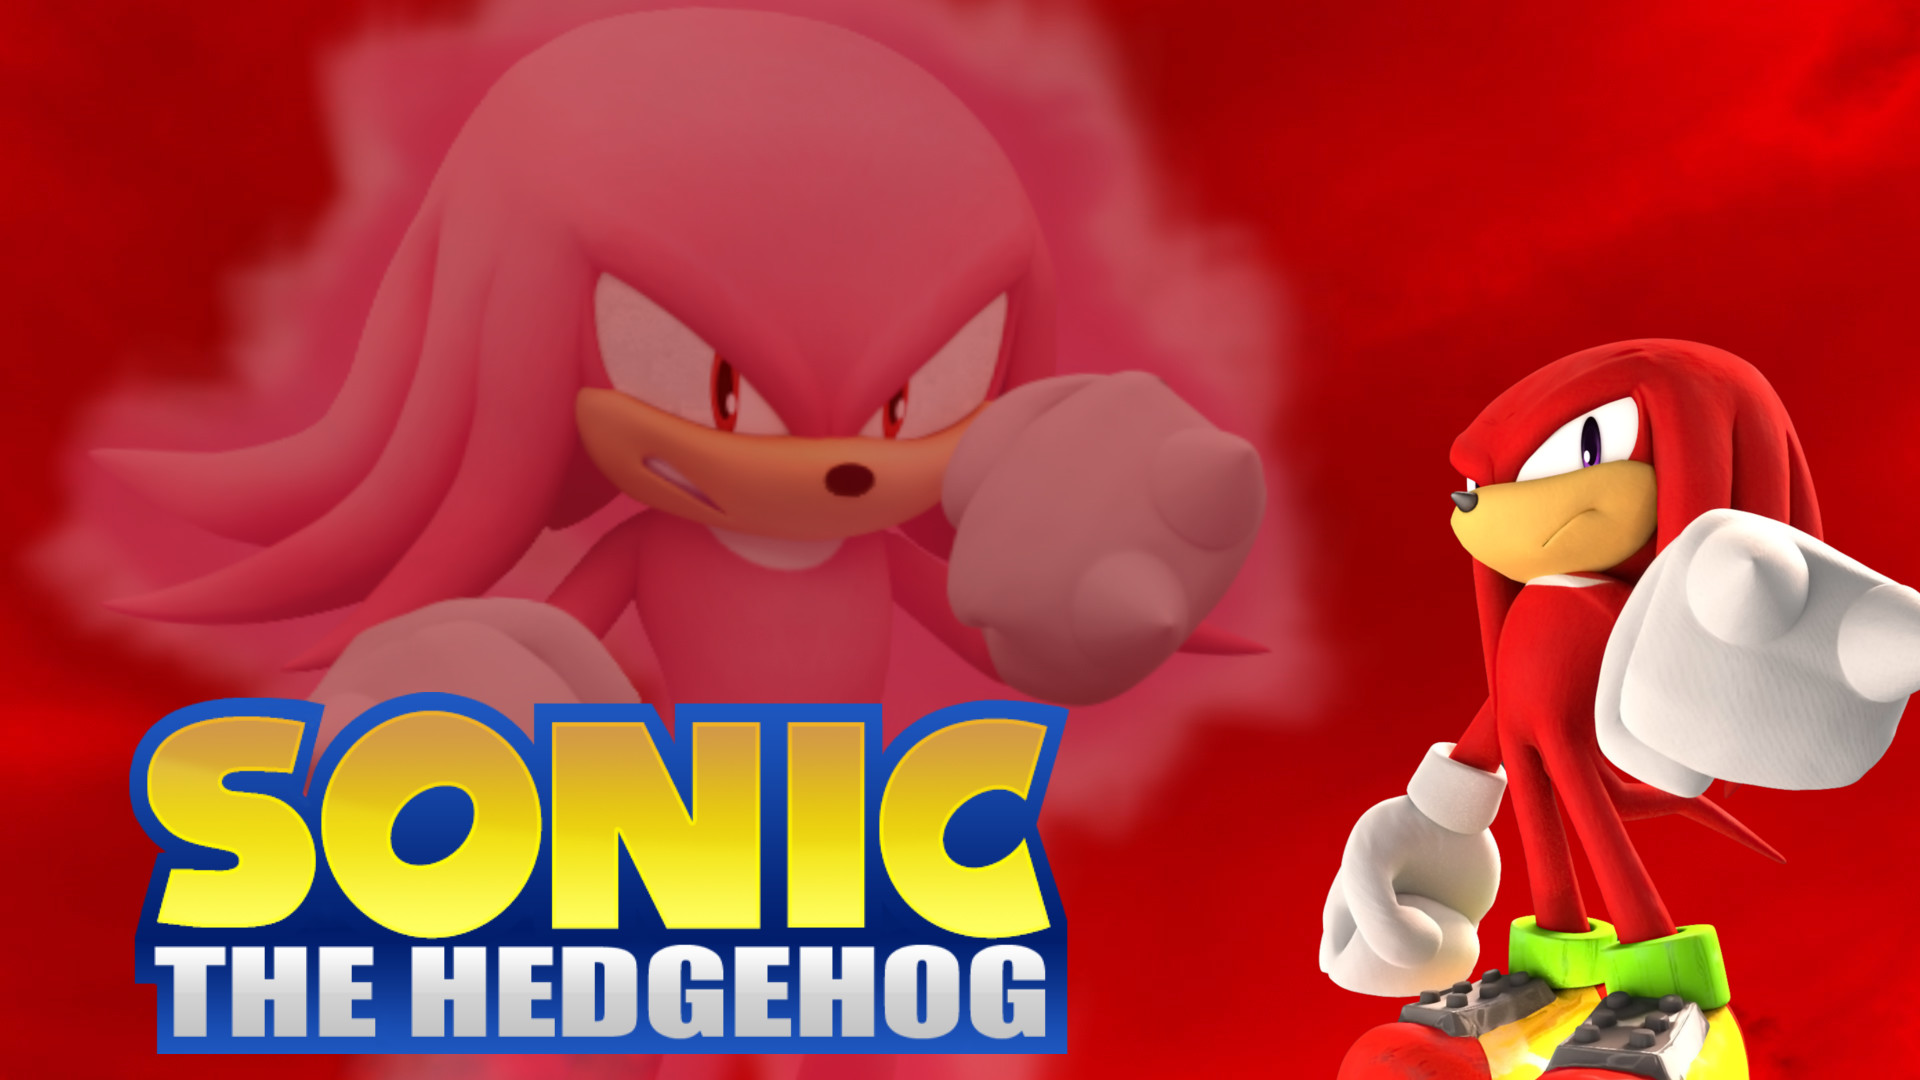 1920x1080 ... Knuckles The Echidna Wallpaper by: AxelG4m3r by AxelG4m3r